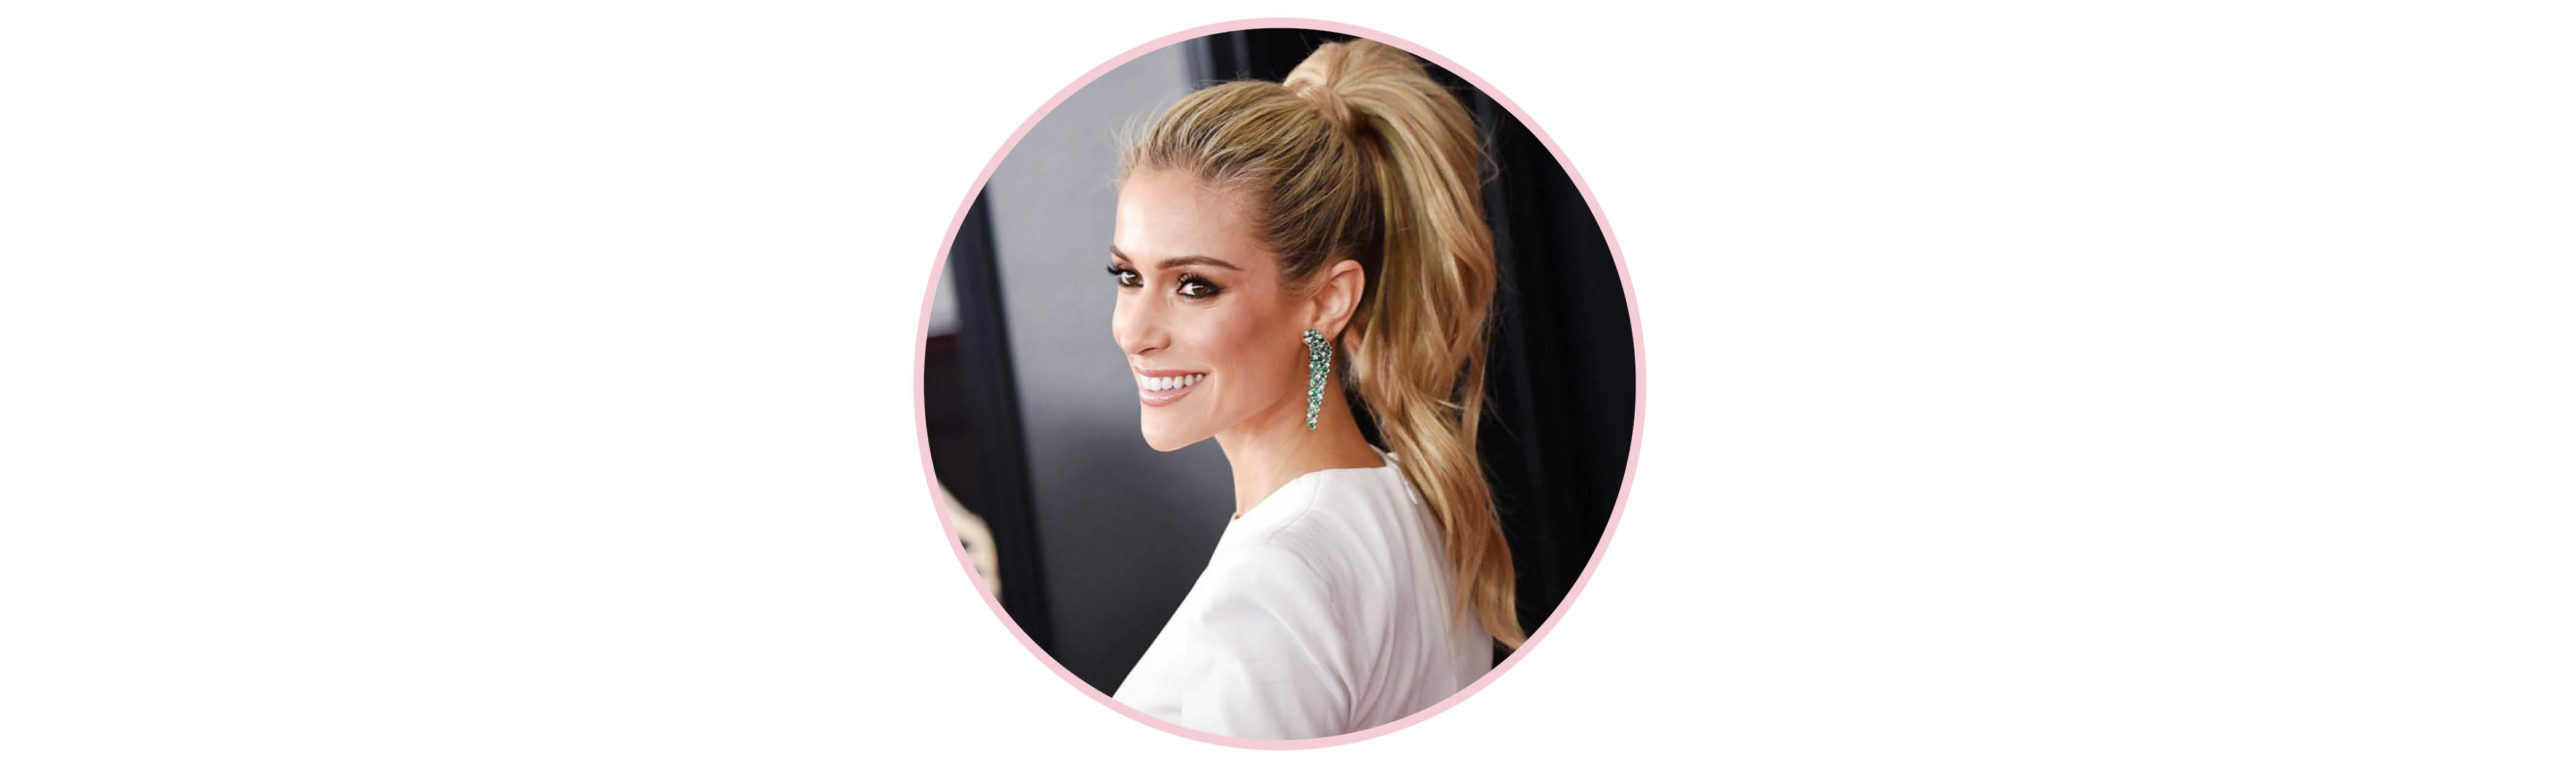 MissFQ-How-To-Dramatic-Ponytail-Phoebe-Silver-Bullet_1000x300